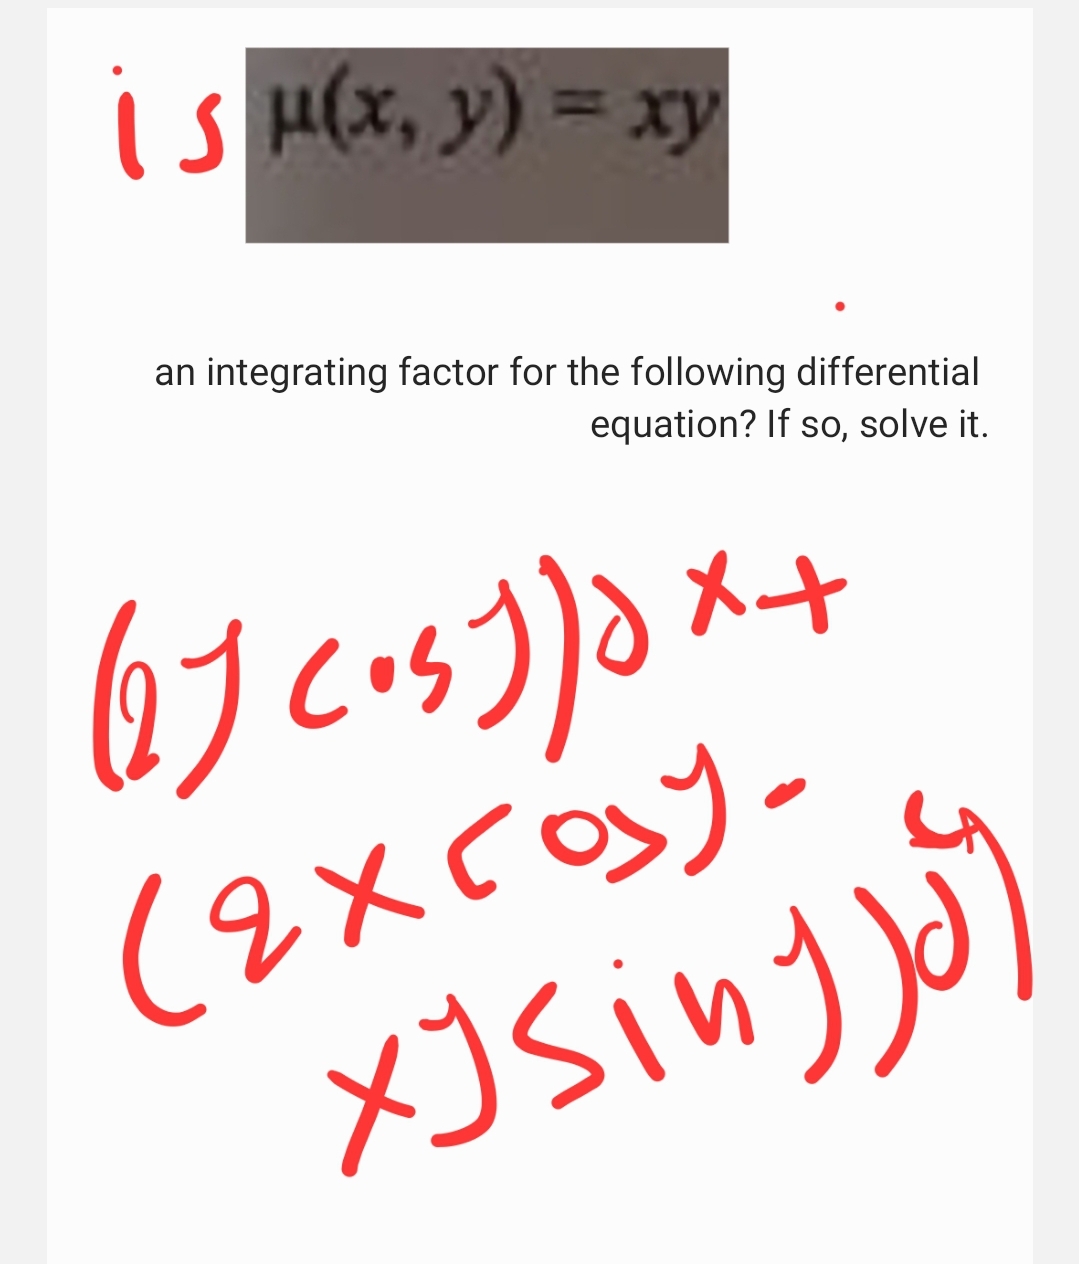 is μ(x, y) = xy
an integrating factor for the following differential
equation? If so, solve it.
メナ
(2) C₁₂ )))x+
сех созу-
xysingjoy